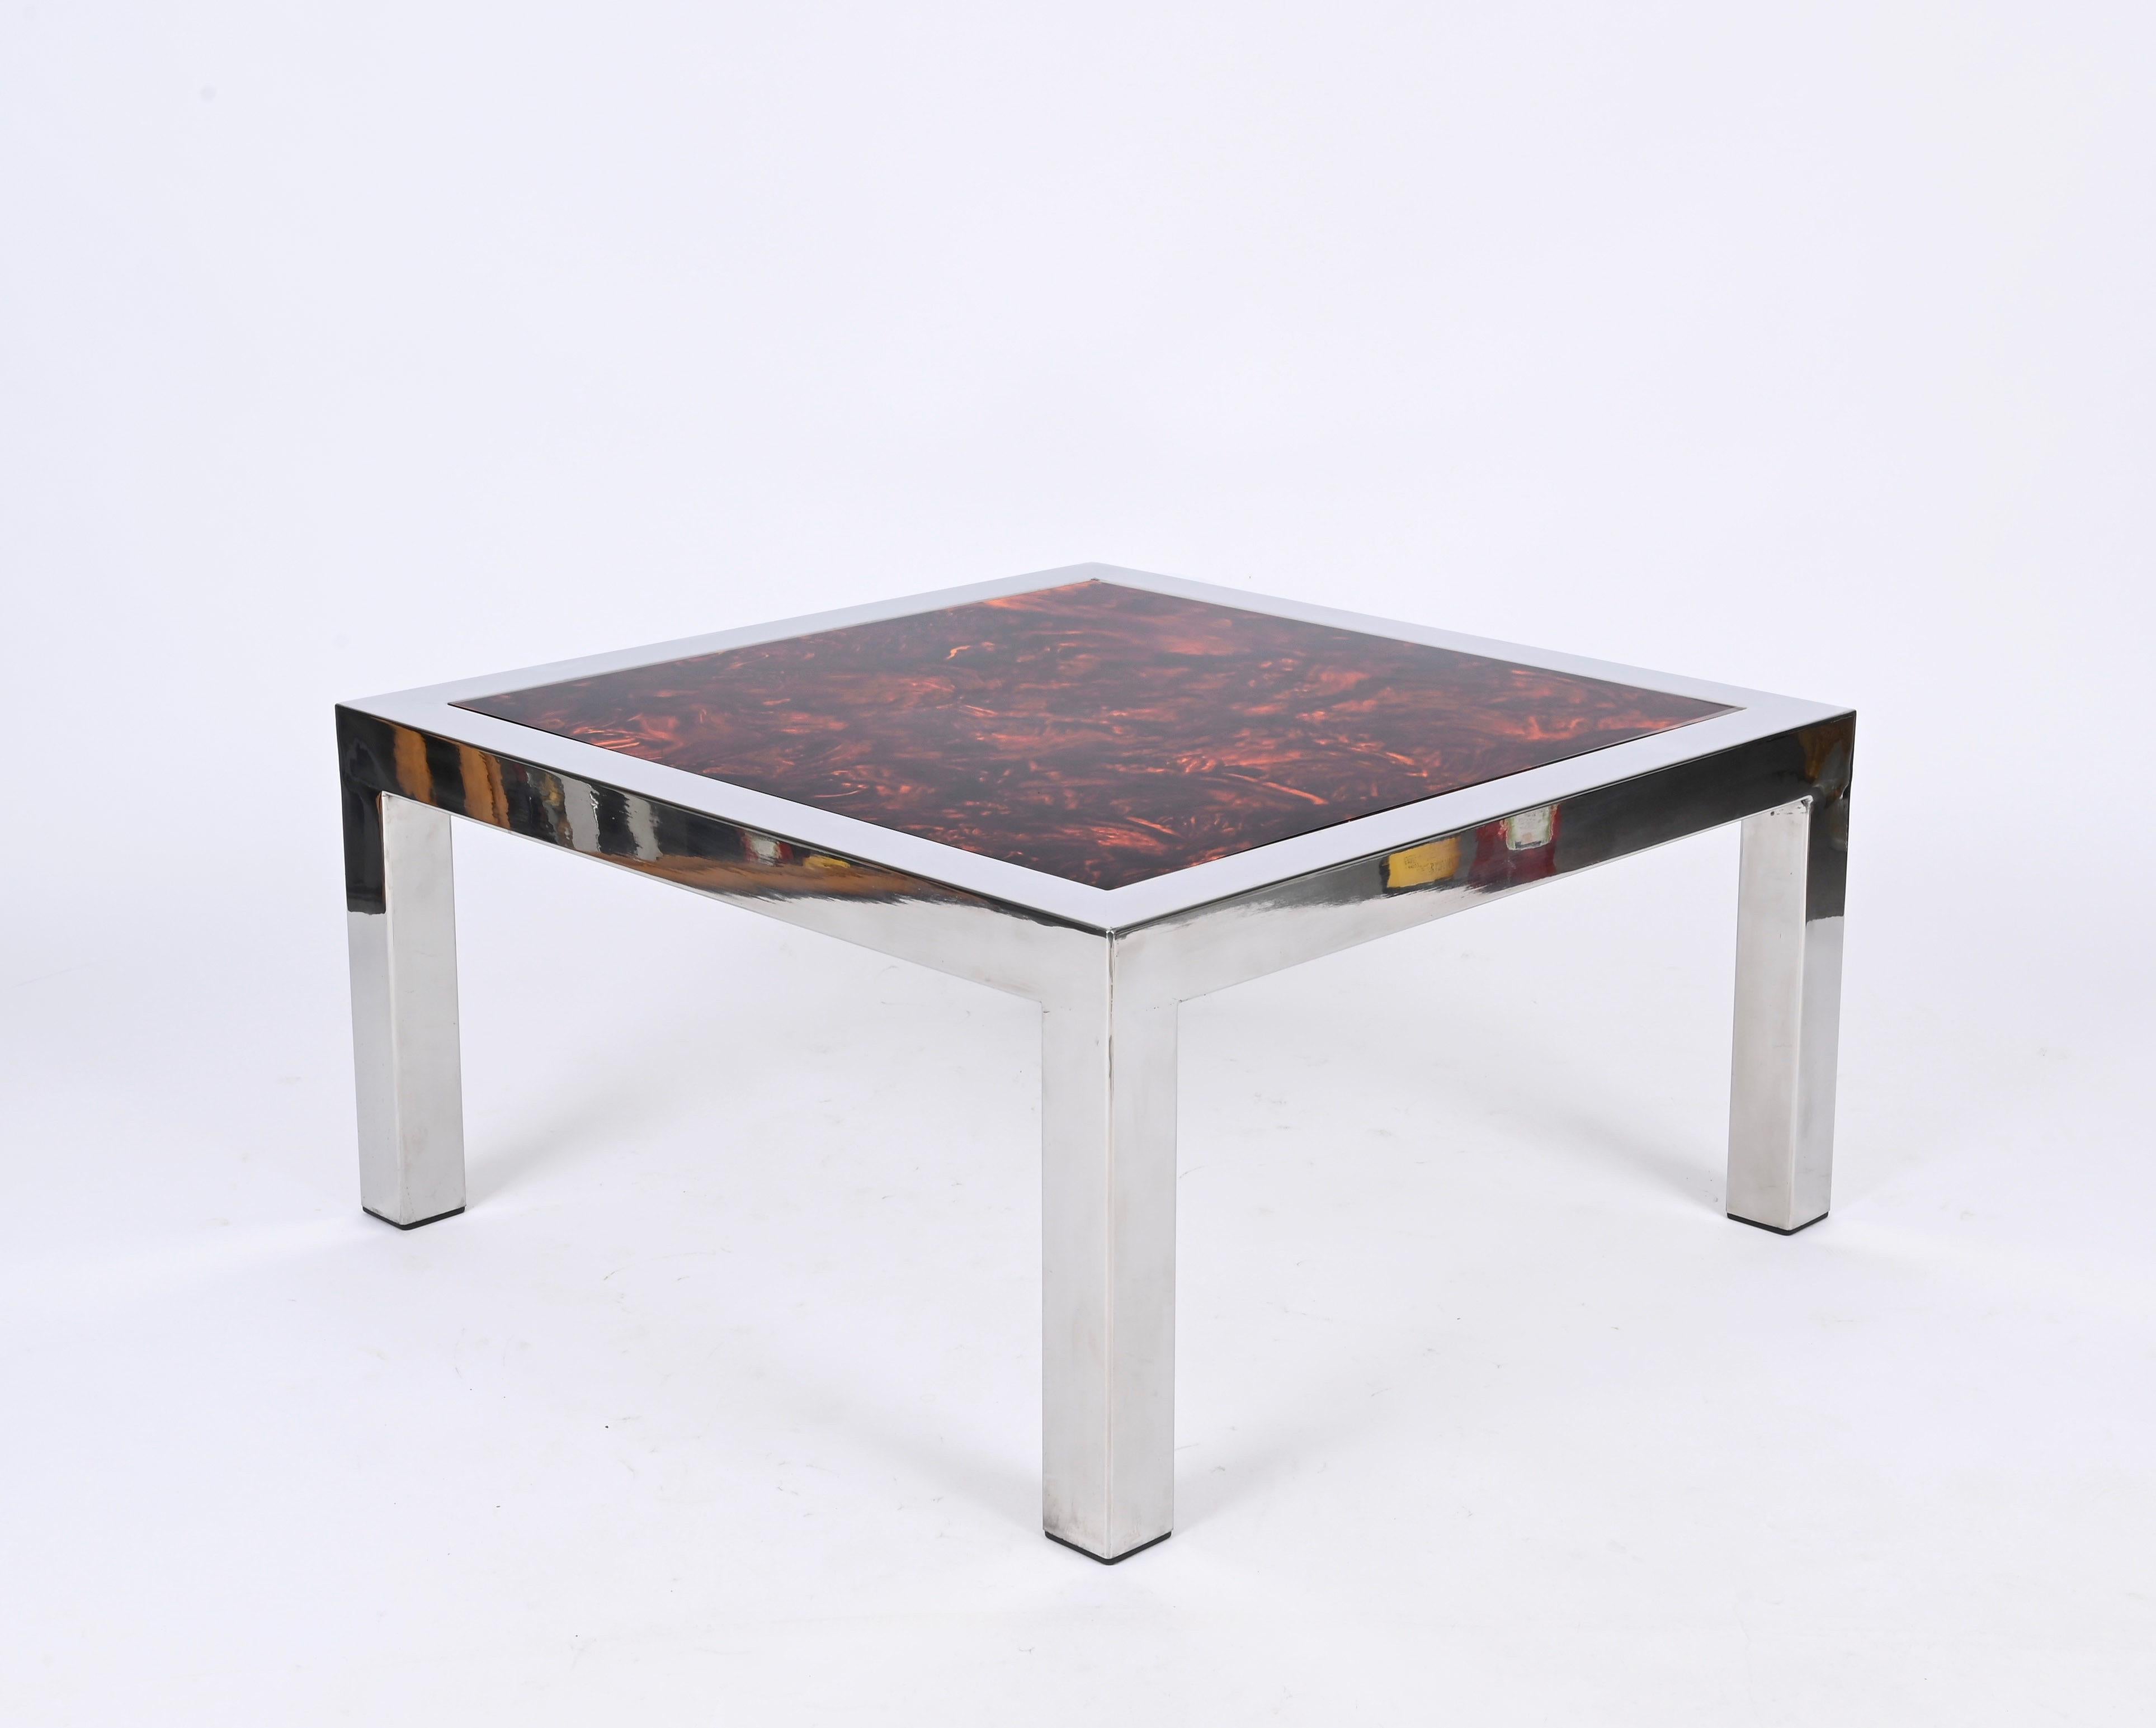 Chromed Steel and Tortoiseshell Effect Lucite Square Coffee Table, Italy 1970s For Sale 3